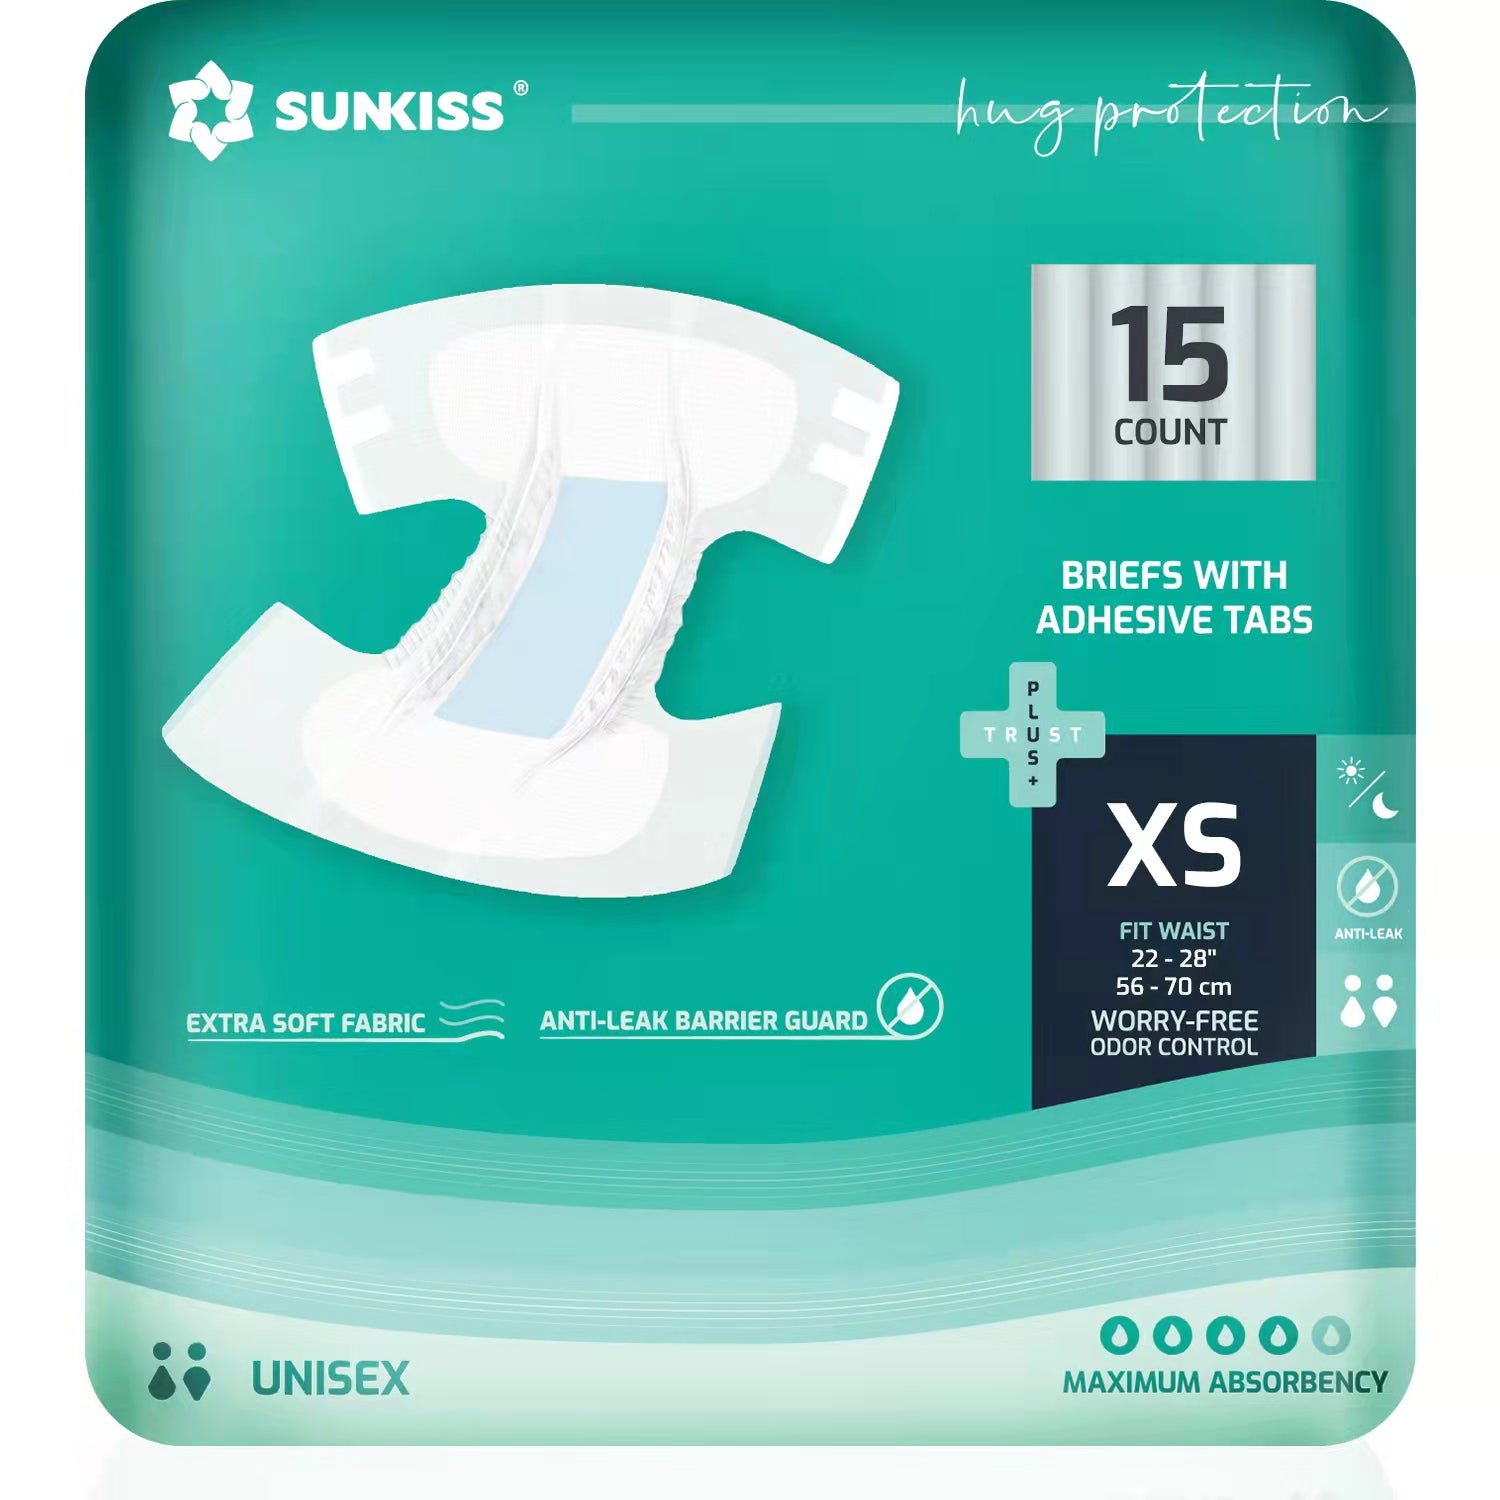 SUNKISS TrustPlus+ Unisex Adult Diapers with Maximum Absorbency